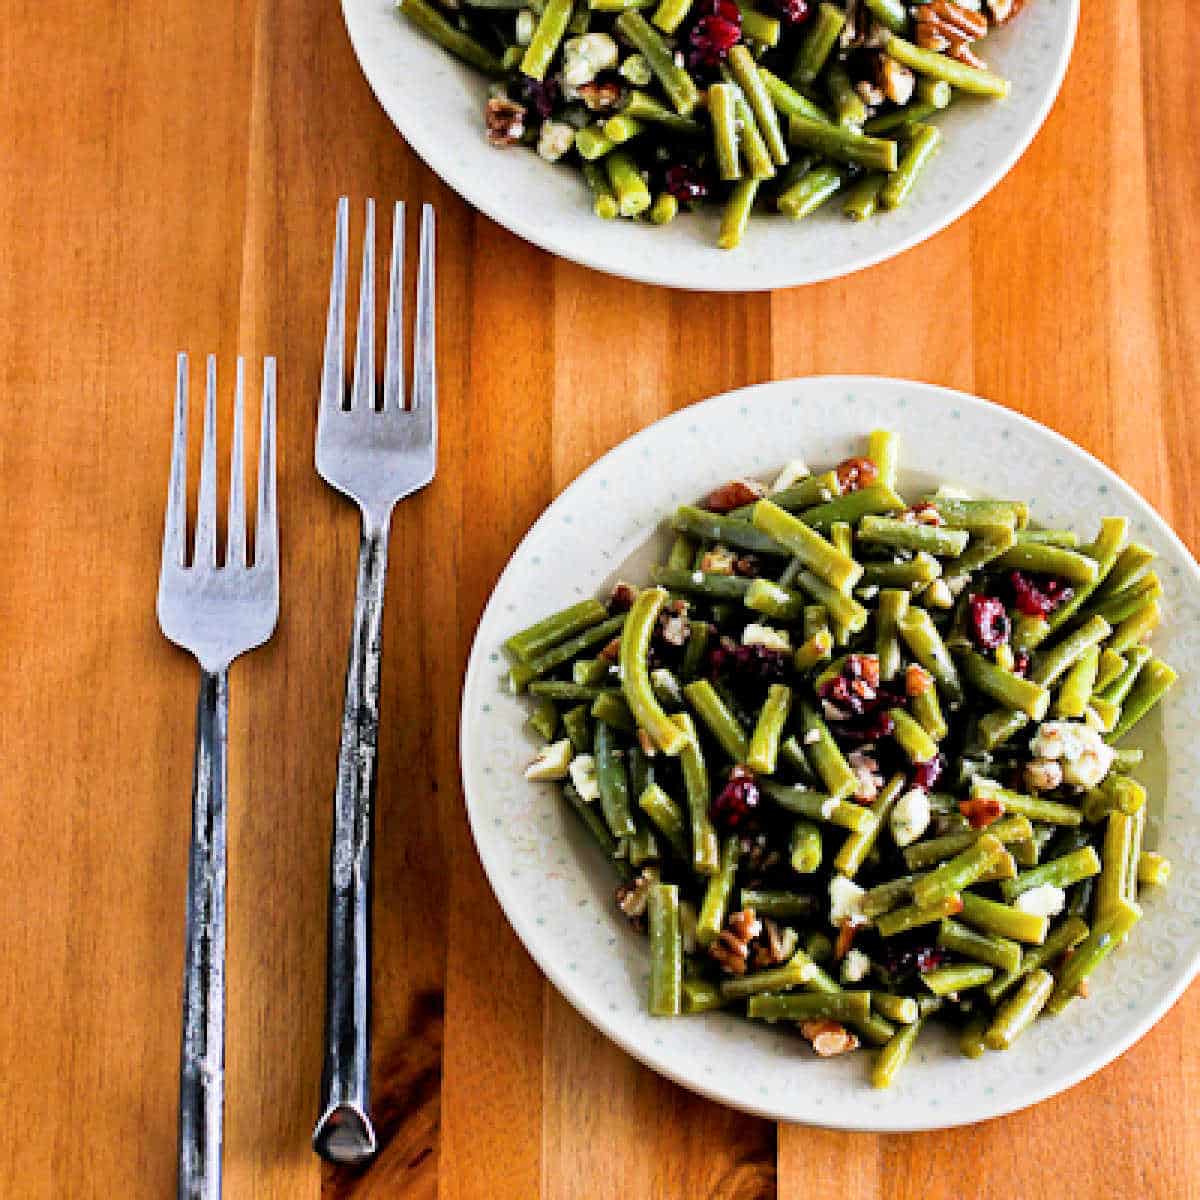 Square image for Thanksgiving Green Bean Salad shown on two plates with forks.